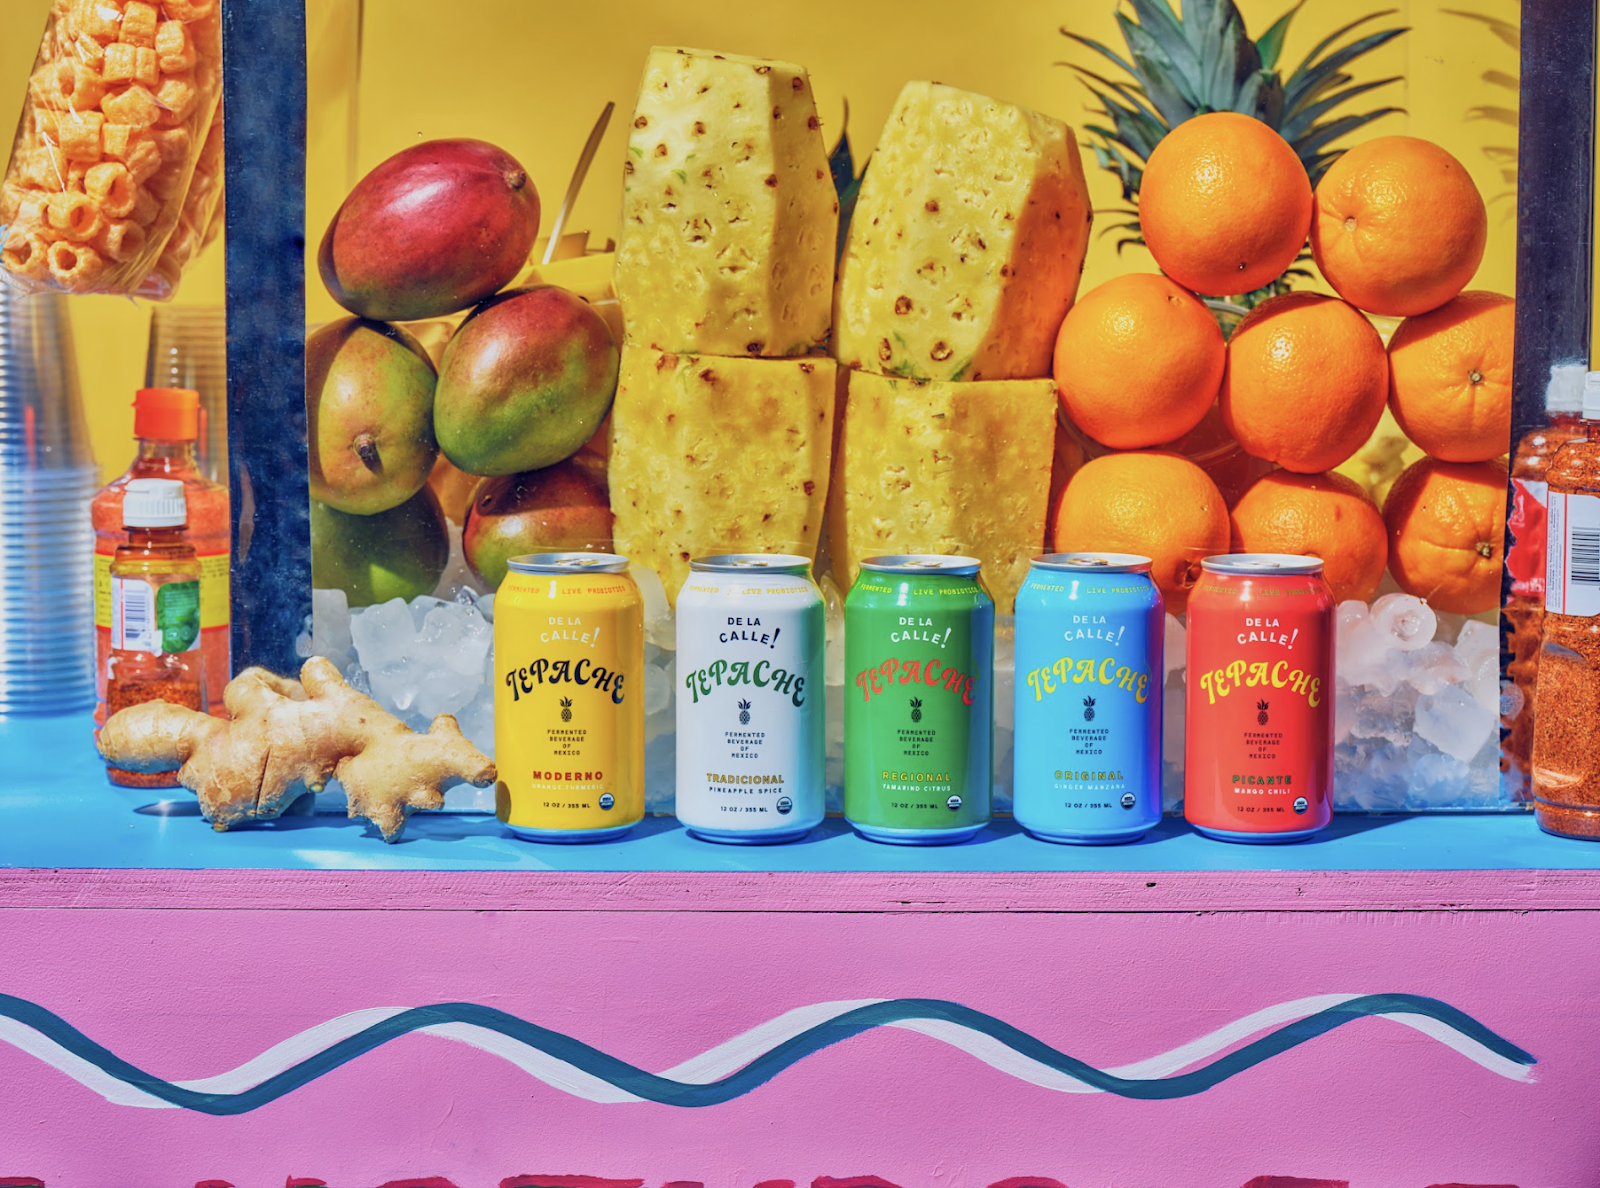 Various cans of De La Calle on colorful tabletop